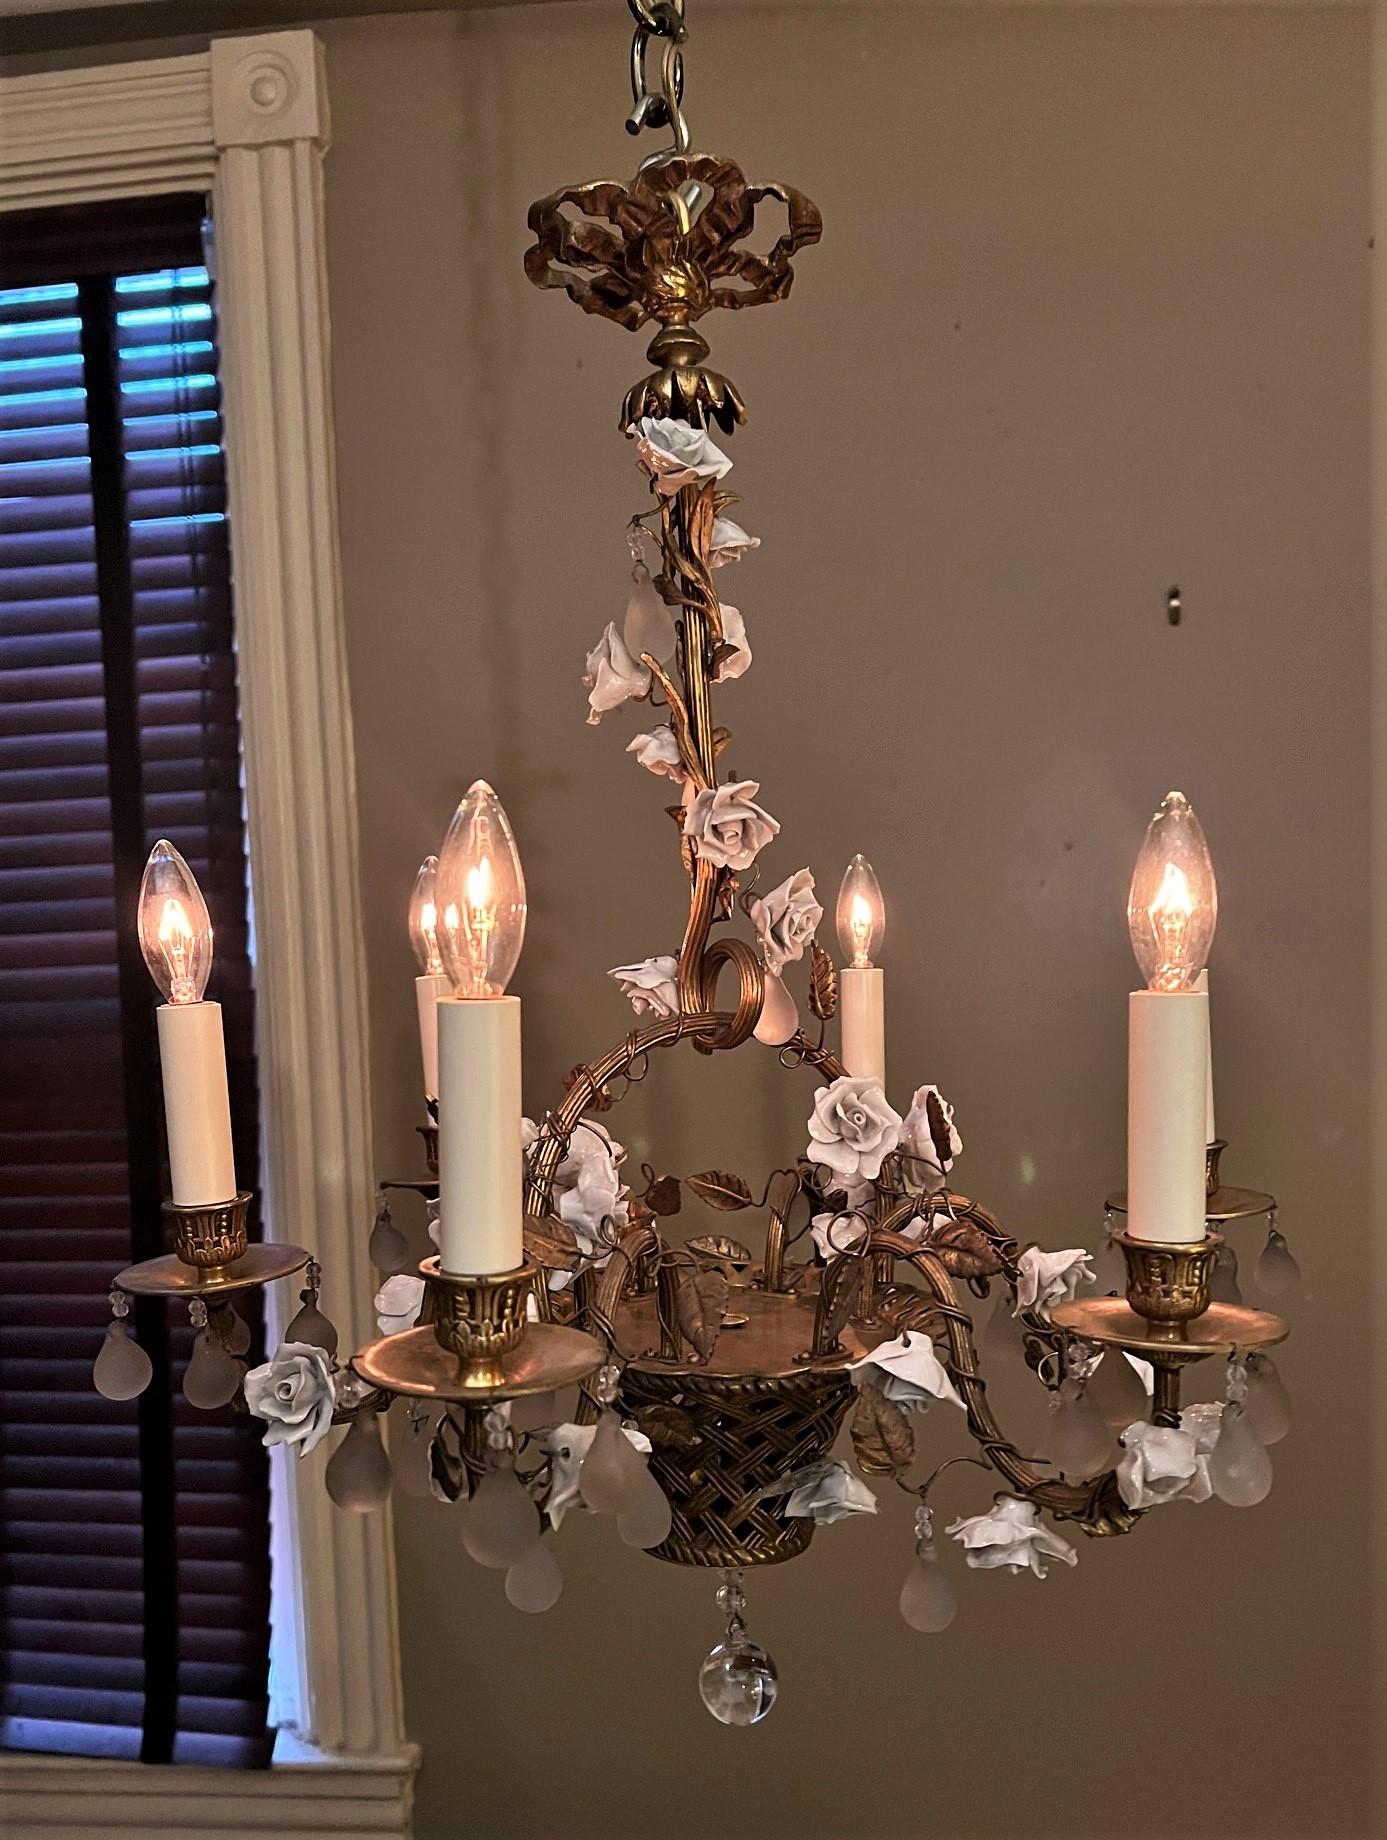 This Louis XVI style chandelier is a copy of the fixtures that often hung in boudoirs of ladies of fashion in mid-18th Century France. Today these chandeliers are perfect for anywhere in the house that real beauty and charm is desired. The basket,